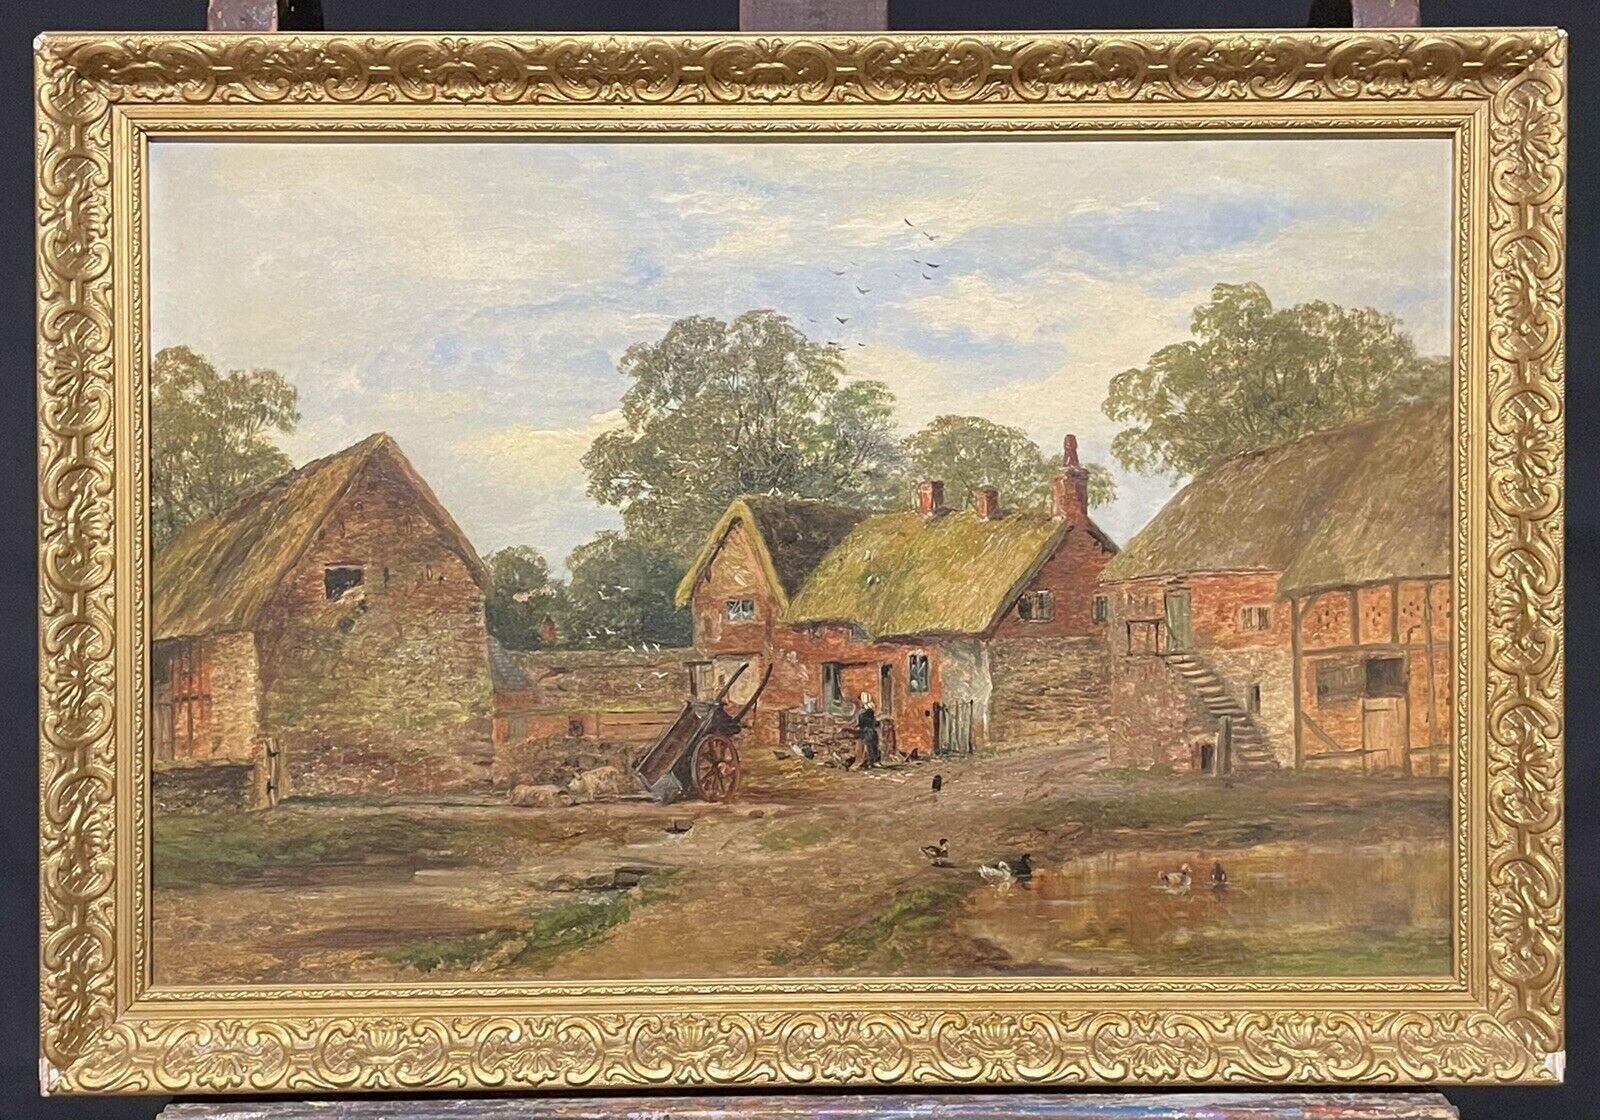 SIGNED VICTORIAN ENGLISH OIL PAINTING - FARMYARD SCENE OLD BUILDINGS -DATED 1875 - Painting by T Turner